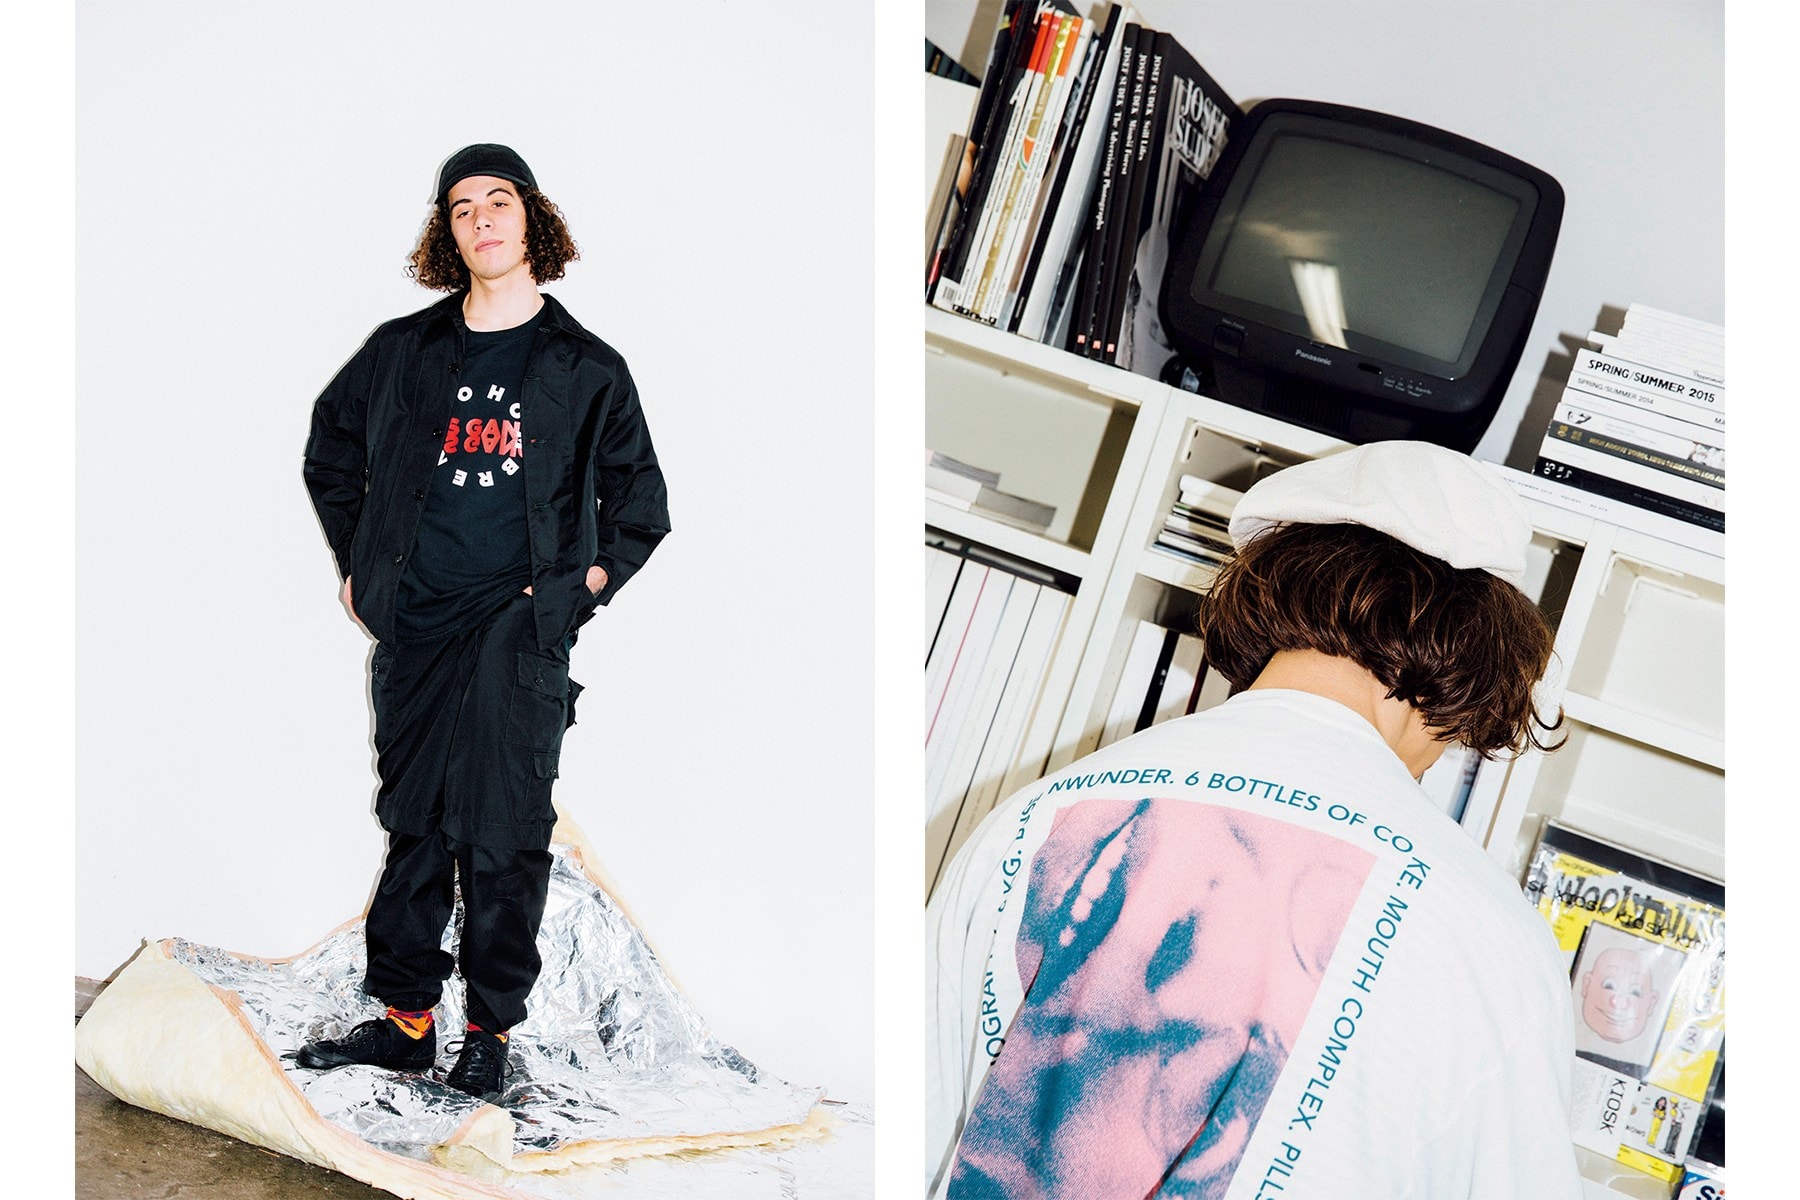 SHIPS JET BLUE Highlights Graphic Prints and Bold Colors for 2017 Spring/Summer Lookbooks Thrasher Fruit of the Loom Vans